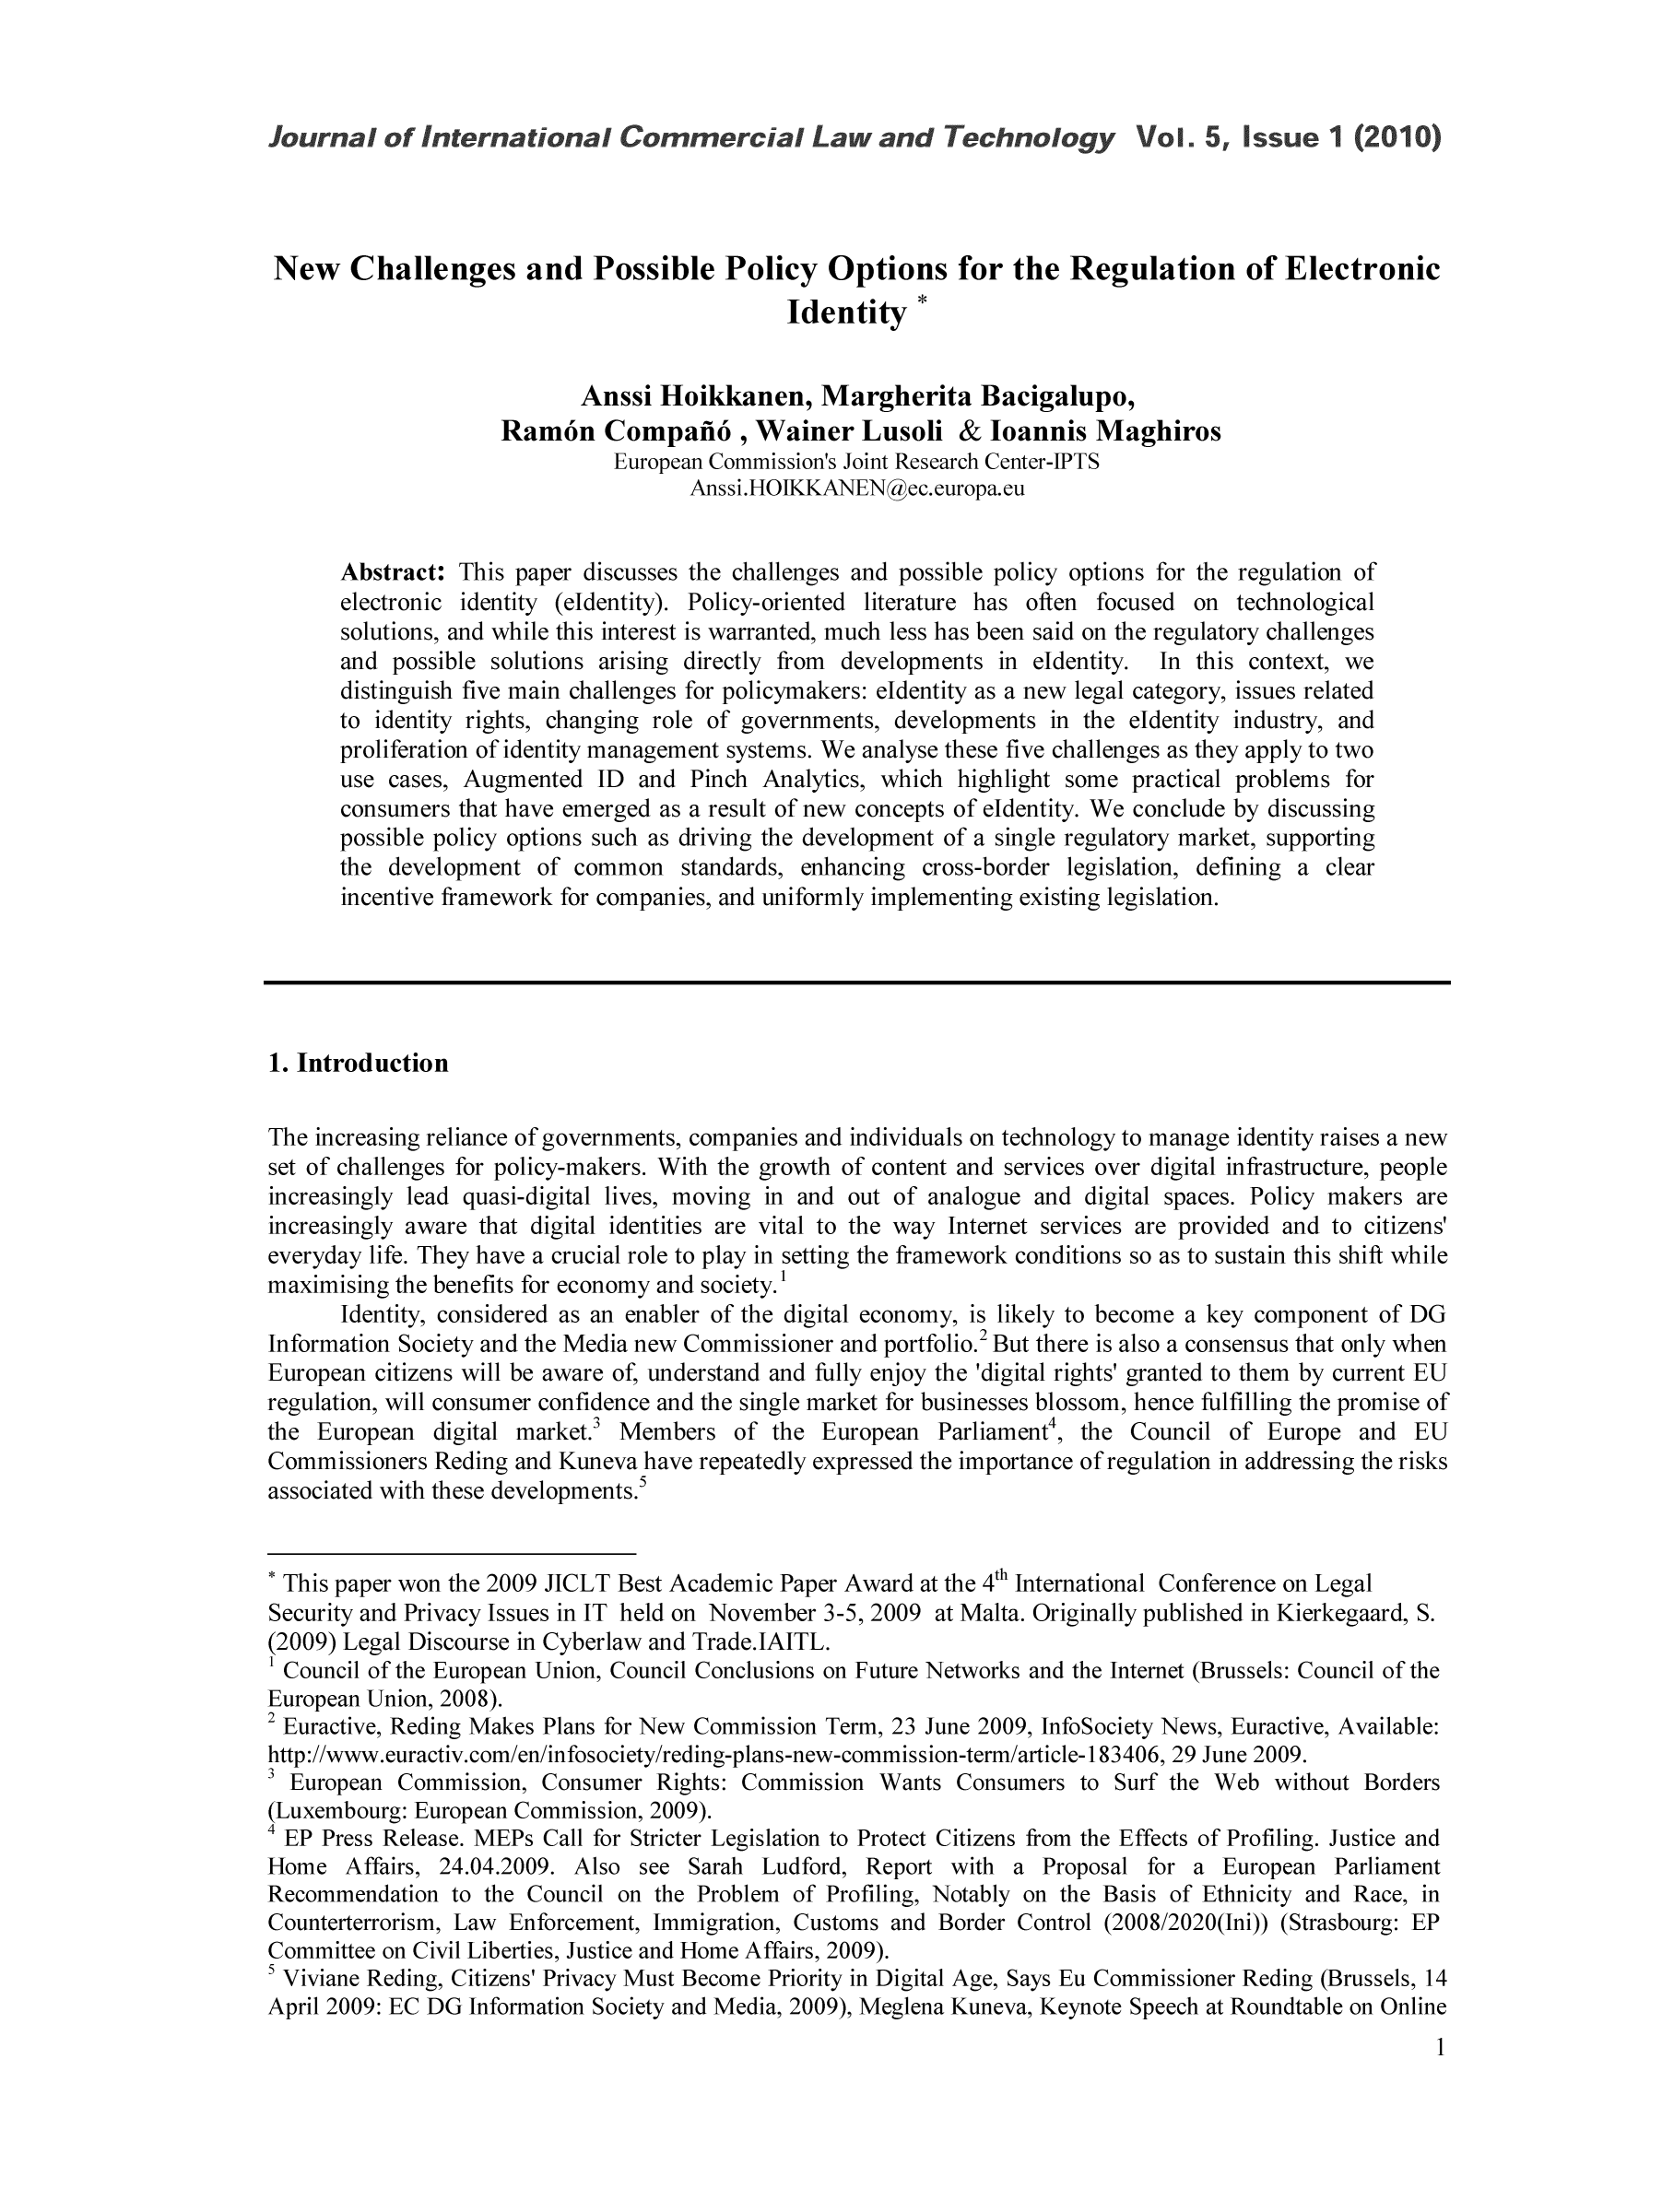 handle is hein.journals/jcolate5 and id is 1 raw text is: New Challenges and Possible Policy Options for the Regulation of Electronic
Identity *
Anssi Hoikkanen, Margherita Bacigalupo,
Ram6n Compafi6, Wainer Lusoli & toannis Maghiros
European Commission's Joint Research Center-IPTS
Anssi.HOIKKANEN  ec.europa.eu
Abstract: This paper discusses the challenges and possible policy options for the regulation of
electronic identity (eldentity). Policy-oriented literature has often focused on technological
solutions, and while this interest is warranted, much less has been said on the regulatory challenges
and possible solutions arising directly from  developments in eldentity.  In this context, we
distinguish five main challenges for policymakers: eldentity as a new legal category, issues related
to identity rights, changing role of governments, developments in the eldentity industry, and
proliferation of identity management systems. We analyse these five challenges as they apply to two
use cases, Augmented ID and Pinch Analytics, which highlight some practical problems for
consumers that have emerged as a result of new concepts of eldentity. We conclude by discussing
possible policy options such as driving the development of a single regulatory market, supporting
the development of common standards, enhancing cross-border legislation, defining a clear
incentive framework for companies, and uniformly implementing existing legislation.
1. Introduction
The increasing reliance of governments, companies and individuals on technology to manage identity raises a new
set of challenges for policy-makers. With the growth of content and services over digital infrastructure, people
increasingly lead quasi-digital lives, moving in and out of analogue and digital spaces. Policy makers are
increasingly aware that digital identities are vital to the way Internet services are provided and to citizens'
everyday life. They have a crucial role to play in setting the framework conditions so as to sustain this shift while
maximising the benefits for economy and society.'
Identity, considered as an enabler of the digital economy, is likely to become a key component of DG
Information Society and the Media new Commissioner and portfolio.2 But there is also a consensus that only when
European citizens will be aware of, understand and fully enjoy the 'digital rights' granted to them by current EU
regulation, will consumer confidence and the single market for businesses blossom, hence fulfilling the promise of
the European digital market.3 Members of the European Parliament4, the Council of Europe and EU
Commissioners Reding and Kuneva have repeatedly expressed the importance of regulation in addressing the risks
associated with these developments.5
This paper won the 2009 JICLT Best Academic Paper Award at the 4th International Conference on Legal
Security and Privacy Issues in IT held on November 3-5, 2009 at Malta. Originally published in Kierkegaard, S.
(2009) Legal Discourse in Cyberlaw and Trade.IAITL.
1 Council of the European Union, Council Conclusions on Future Networks and the Internet (Brussels: Council of the
European Union, 2008).
2 Euractive, Reding Makes Plans for New Commission Term, 23 June 2009, InfoSociety News, Euractive, Available:
http://www.euractiv.com/en/infosociety/reding-plans-new-commission-term/article-i 83406, 29 June 2009.
3European Commission, Consumer Rights: Commission Wants Consumers to Surf the Web without Borders
(Luxembourg: European Commission, 2009).
4EP Press Release. MEPs Call for Stricter Legislation to Protect Citizens from the Effects of Profiling. Justice and
Home Affairs, 24.04.2009. Also see Sarah Ludford, Report with a Proposal for a European Parliament
Recommendation to the Council on the Problem of Profiling, Notably on the Basis of Ethnicity and Race, in
Counterterrorism, Law Enforcement, Immigration, Customs and Border Control (2008/2020(Ini)) (Strasbourg: EP
Committee on Civil Liberties, Justice and Home Affairs, 2009).

5 Viviane Reding, Citizens' Privacy Must Become Priority in Digital Age, Says Eu Commissioner Reding (Brussels, 14
April 2009: EC DG Information Society and Media, 2009), Meglena Kuneva, Keynote Speech at Roundtable on Online


